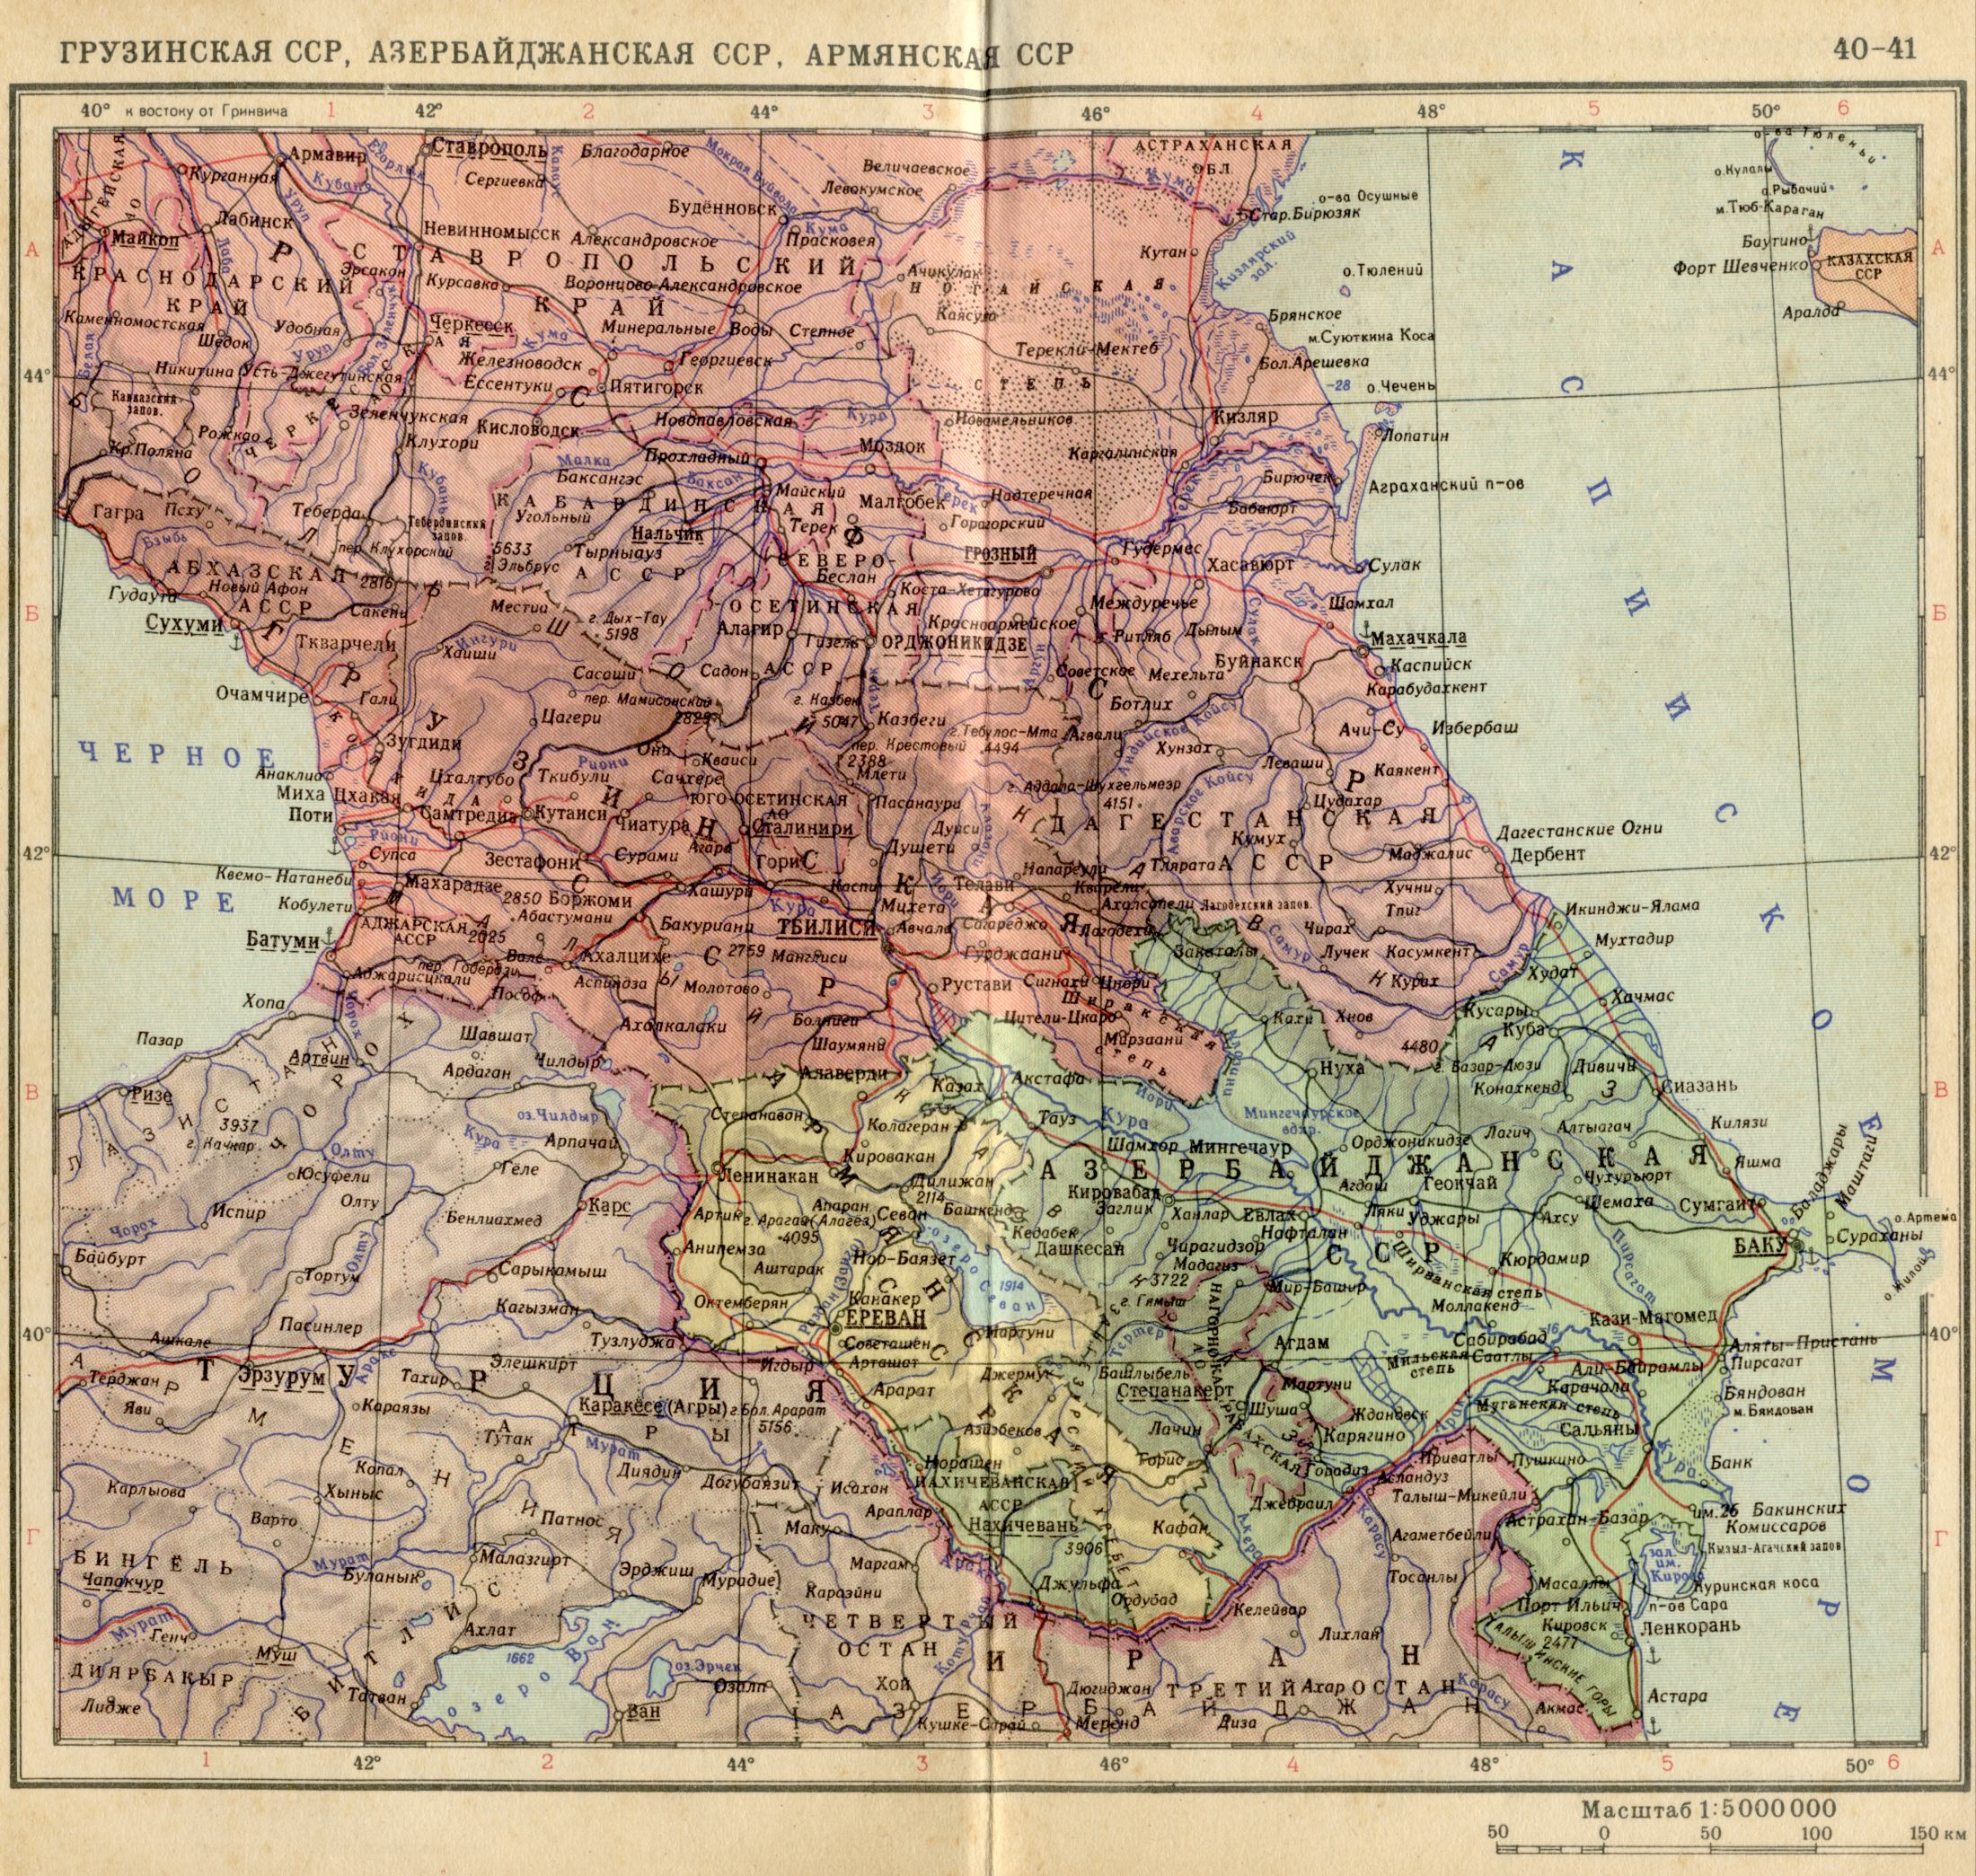 1956 year. A political map of the World. The Georgian SSR, the Armenian SSR, and the Azerbaijani SSR in 1956. Download a detailed map